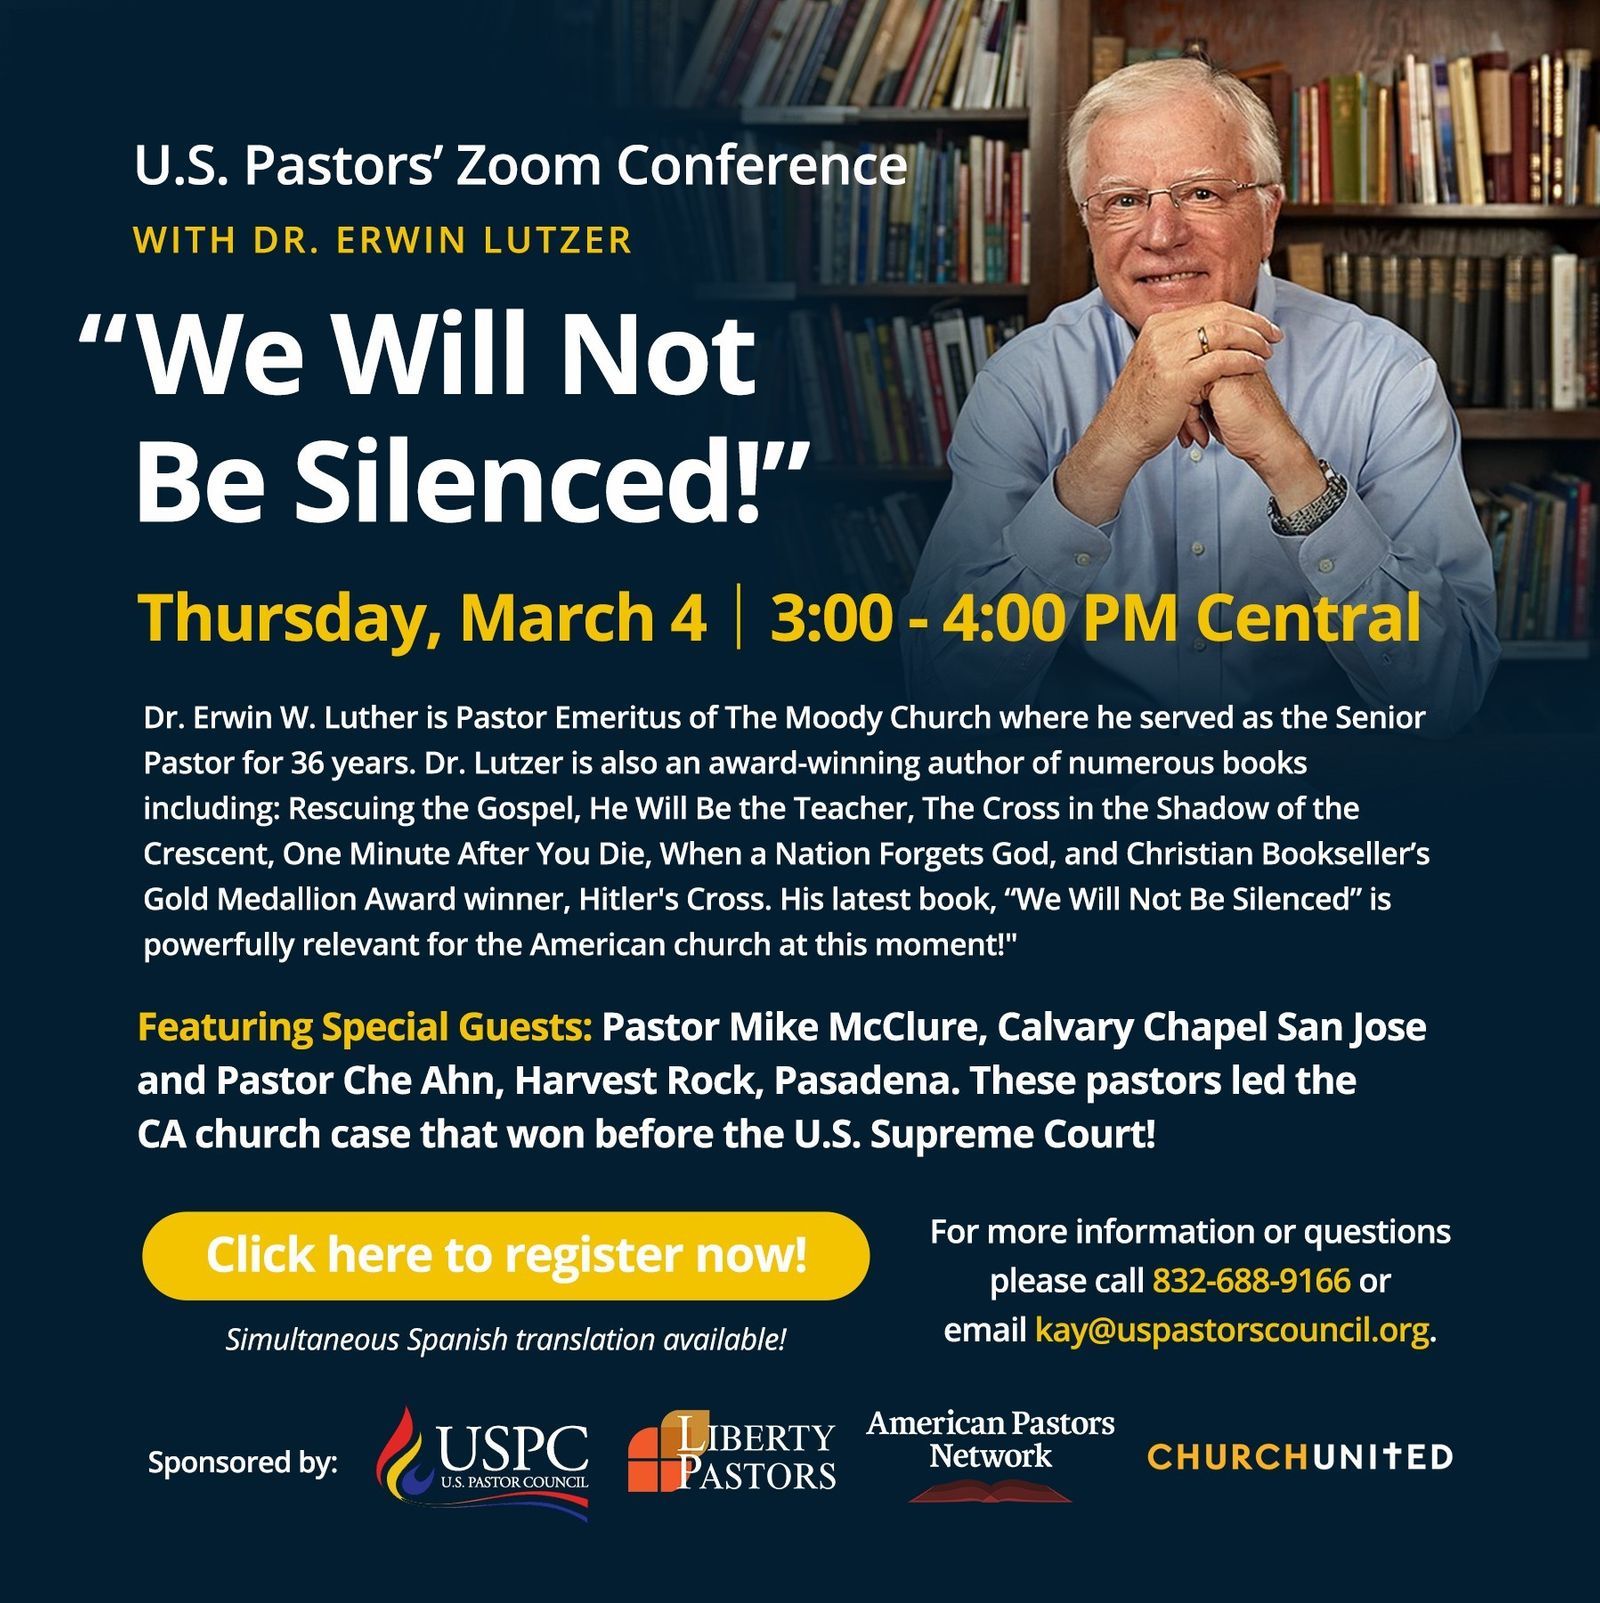 U.S. Pastor Zoom Conference with Dr. Erwin Lutzer Events